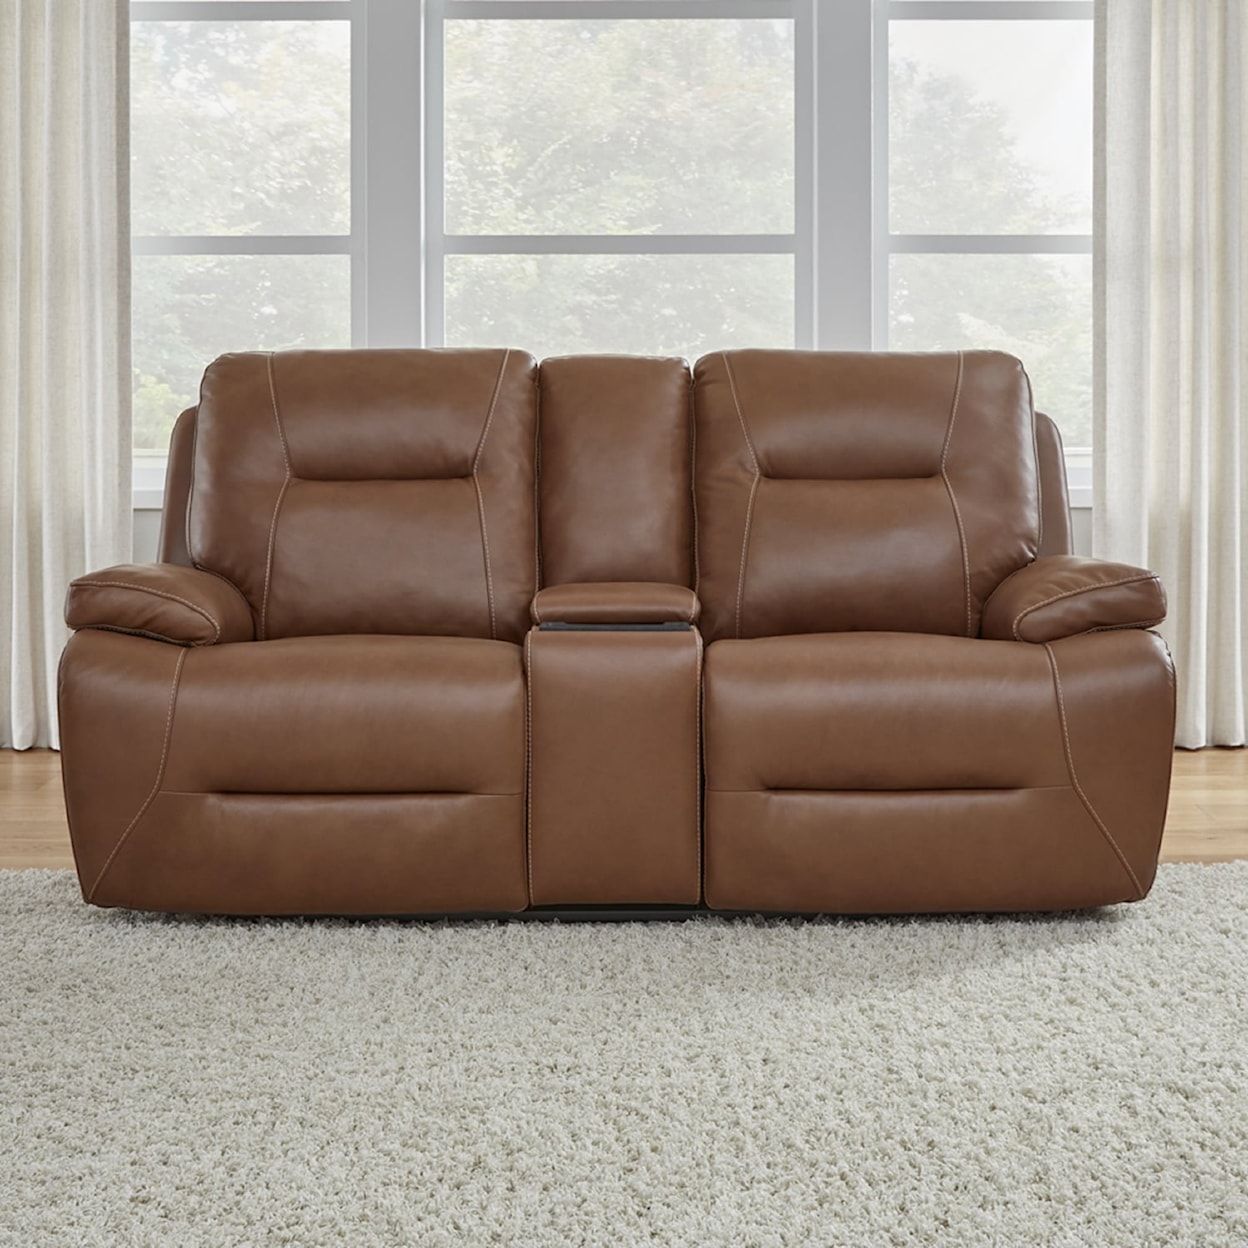 Liberty Furniture Cameron Leather Power Reclining Loveseat